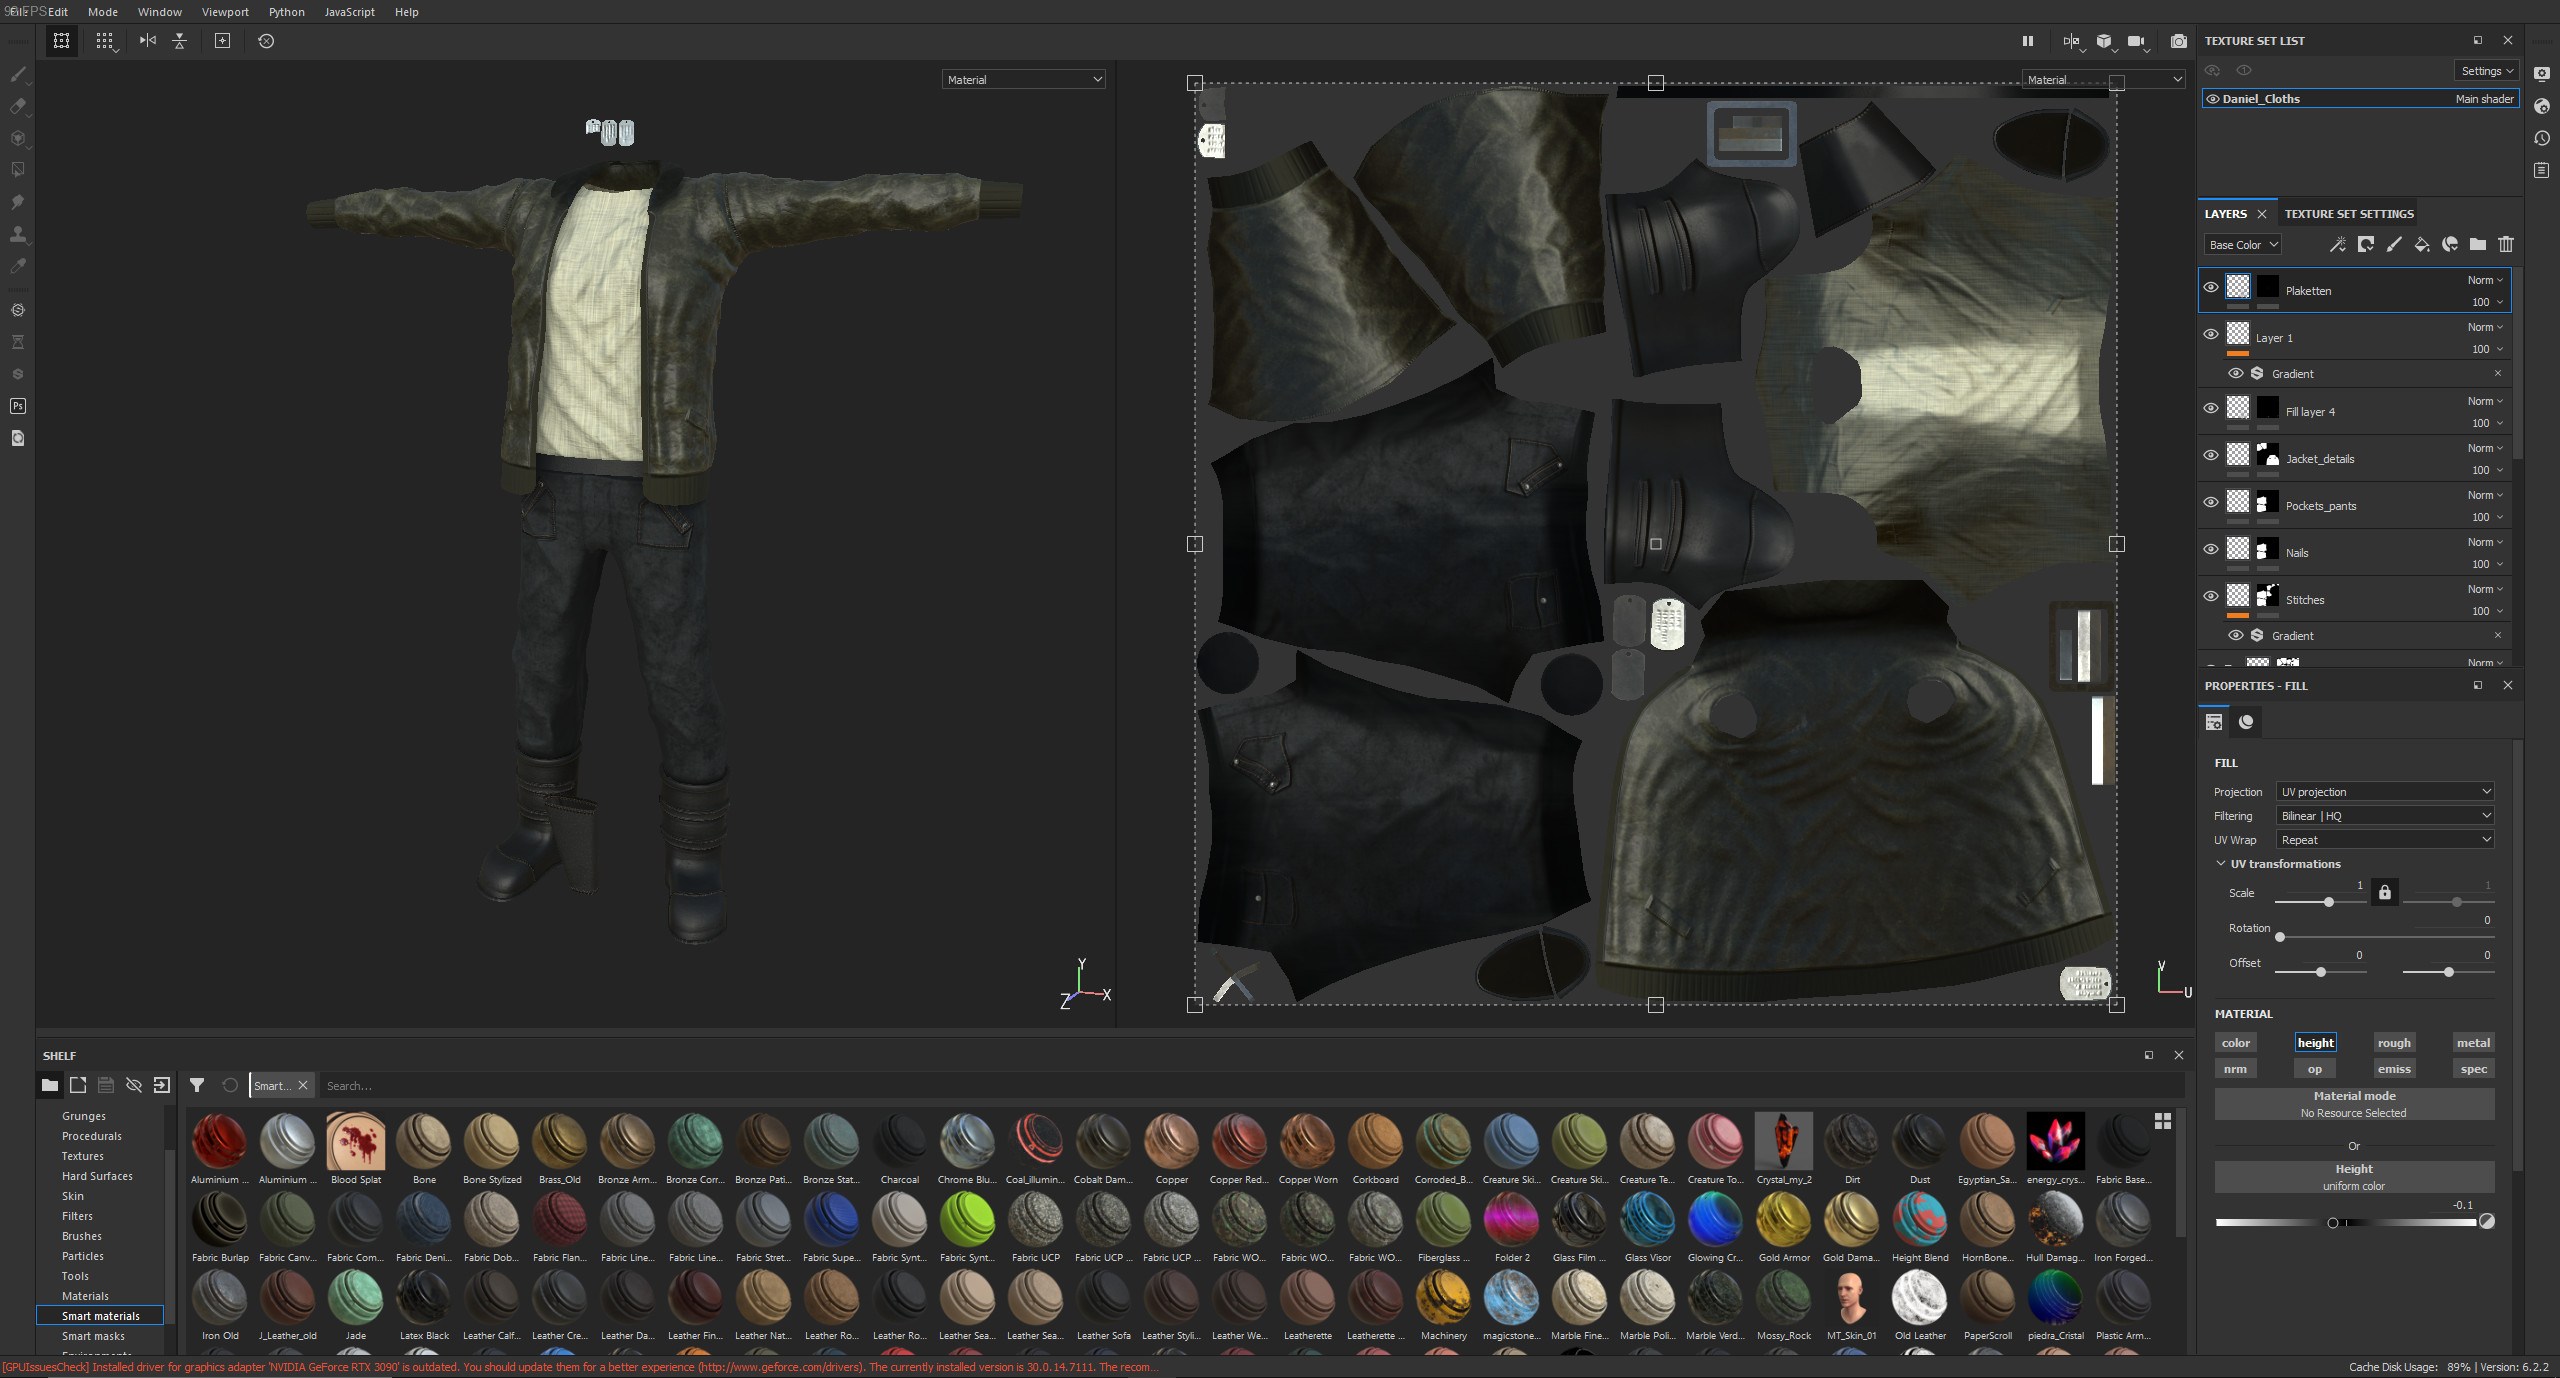 In Substance Painter cloths